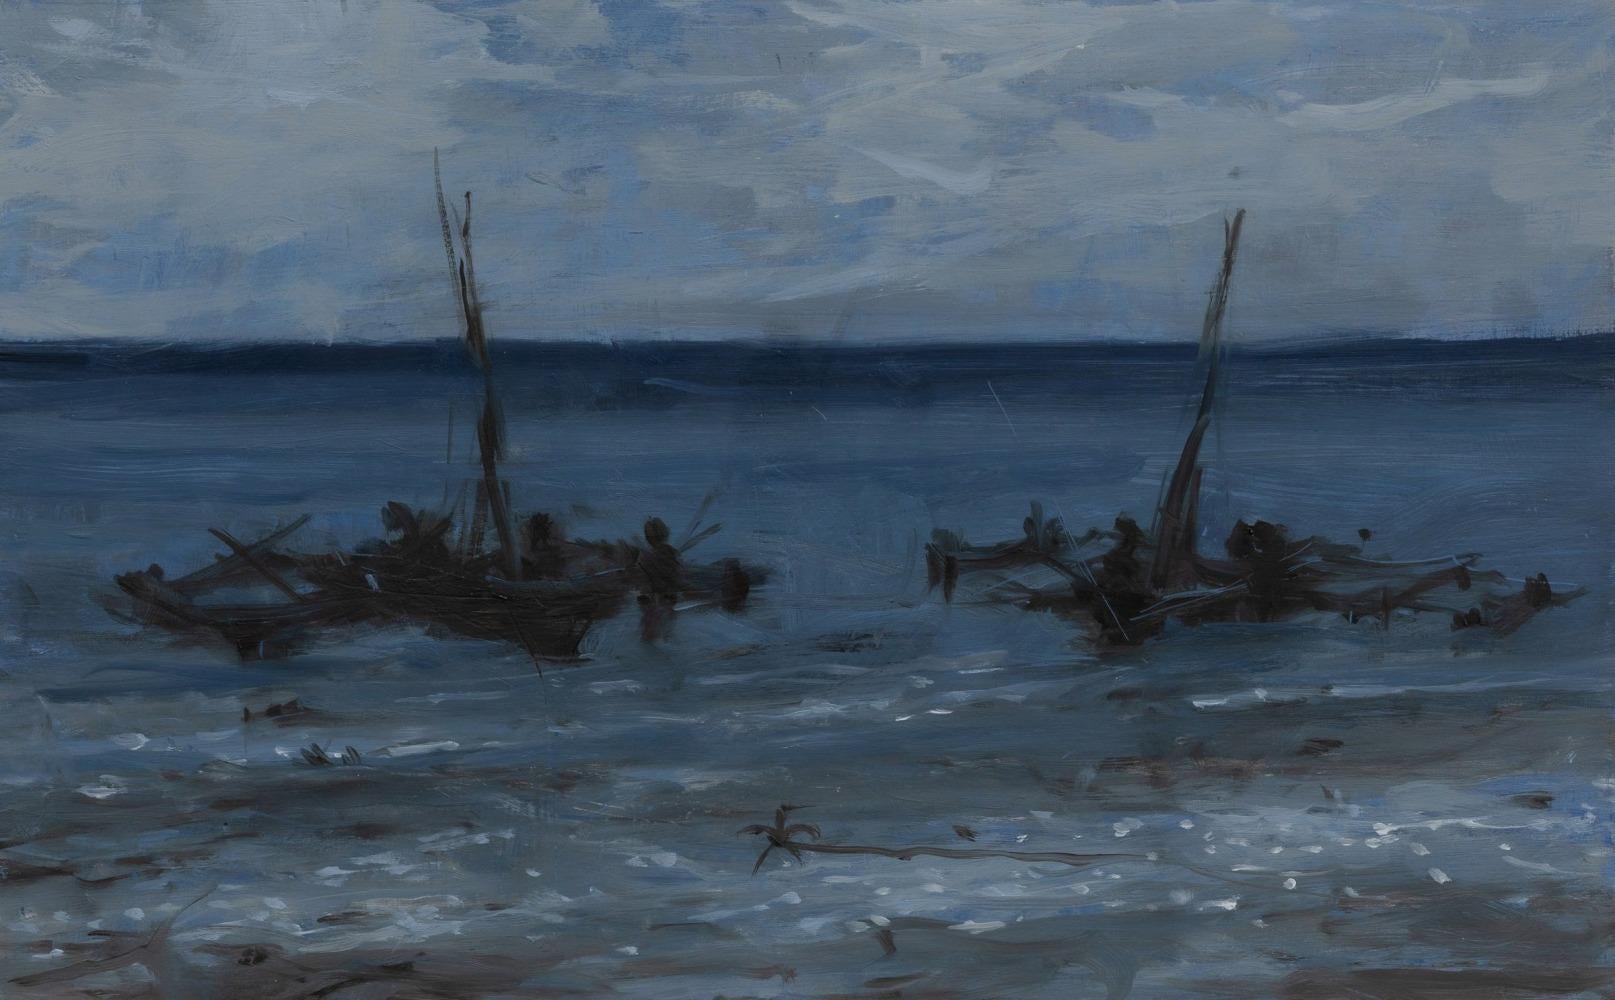 Marinas No. 3 is a unique oil on wood painting by contemporary artist Calo Carratalá, dimensions are 22 × 35 cm (8.7 × 13.8 in). 
The artwork is signed, sold unframed and comes with a certificate of authenticity.

This landscape painting transports